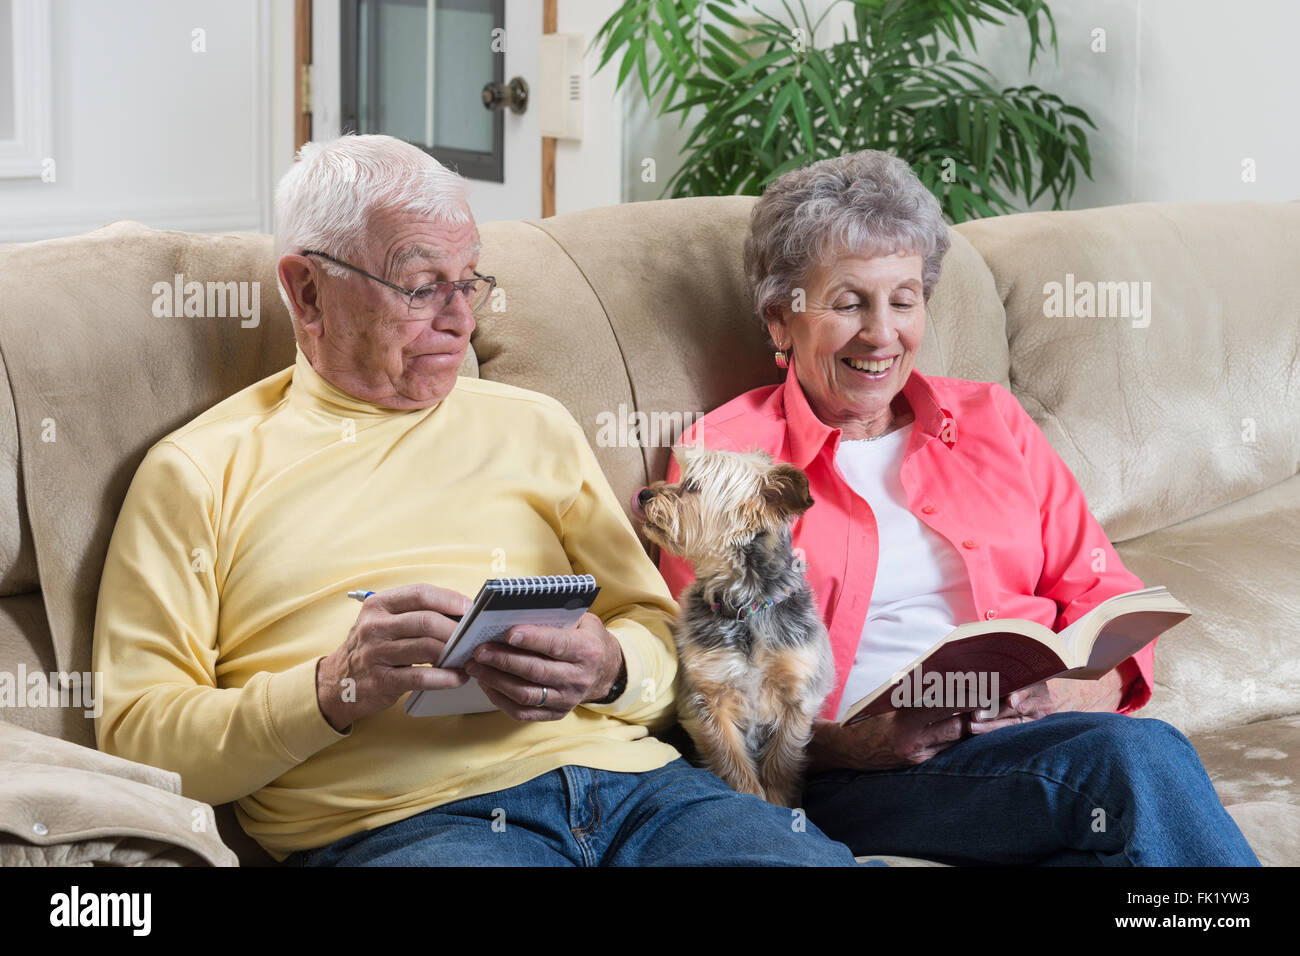 A retired couple relaxing is interrupted by their little dog looking for attention. Stock Photo